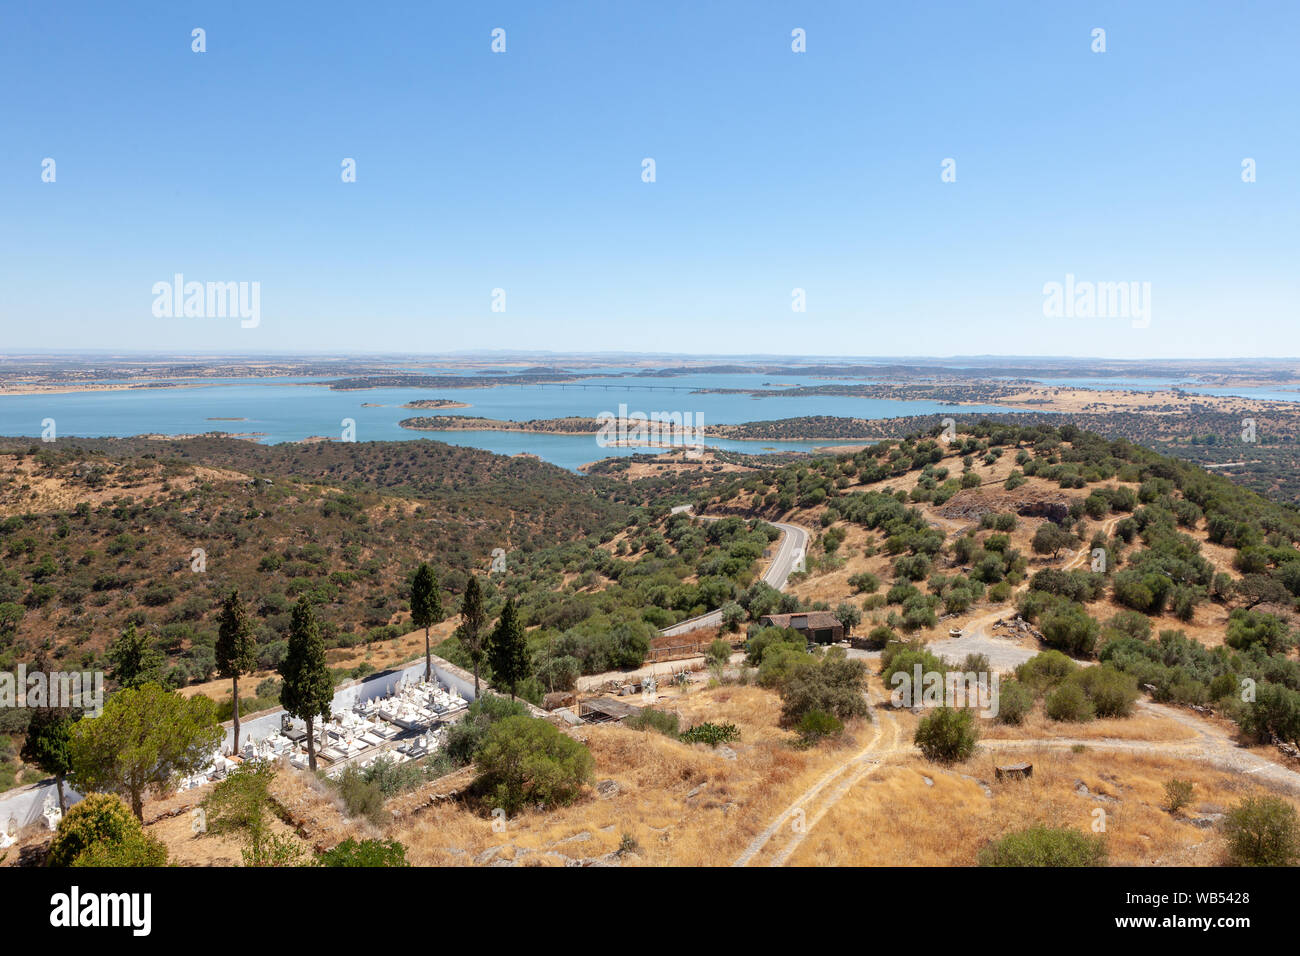 A view of the Alqueva Dam, the largest artificial lake in Europe, from the hilltop village of Monsaraz in the Alentejo region, Portugal Stock Photo